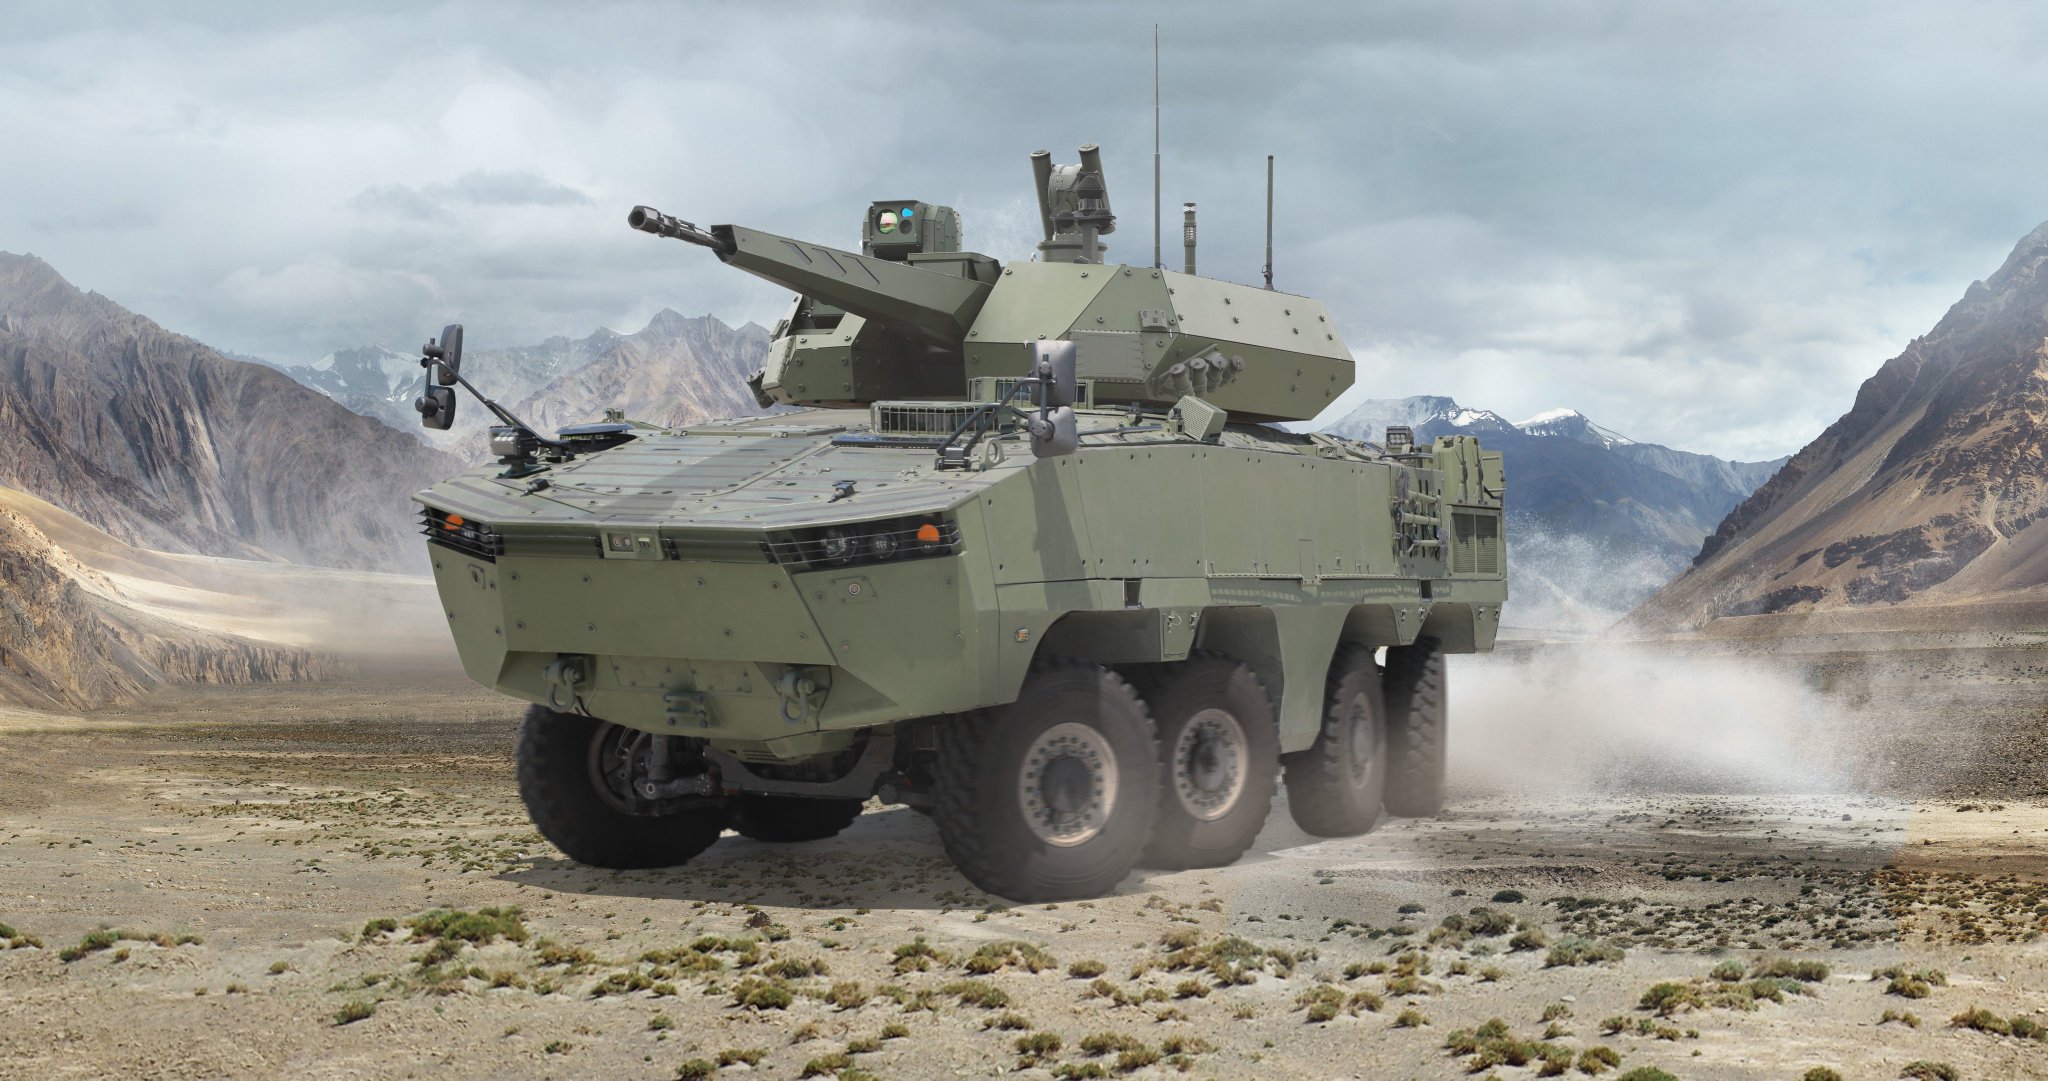 ARMA 8x8 Multi-wheeled Armored Vehicle with KORHAN turret system